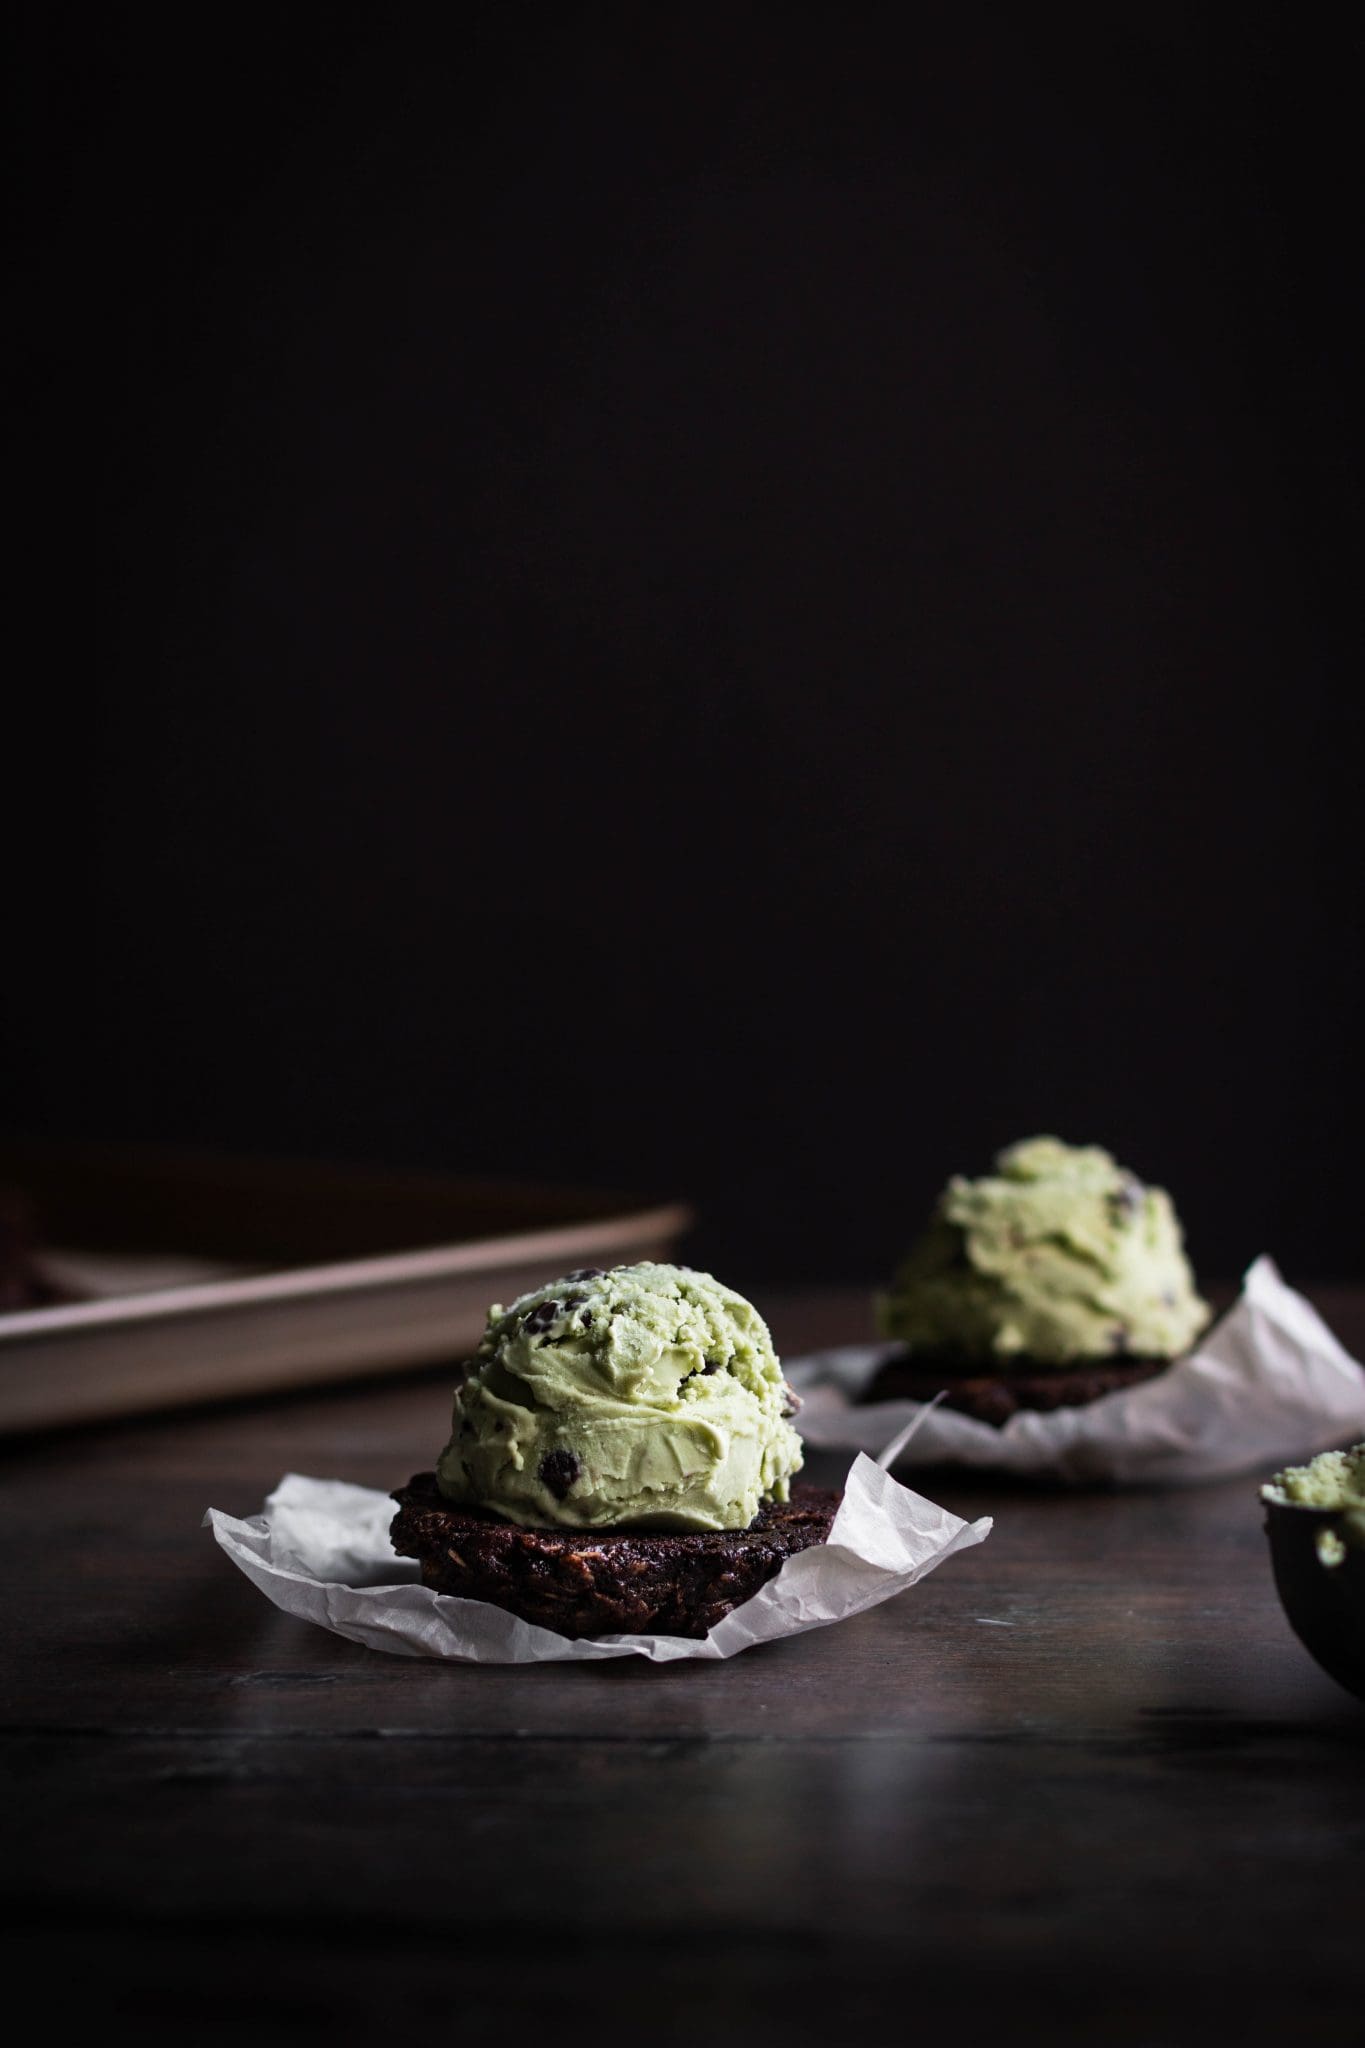 scoop of mint chocolate ice cream on a chocolate cookie